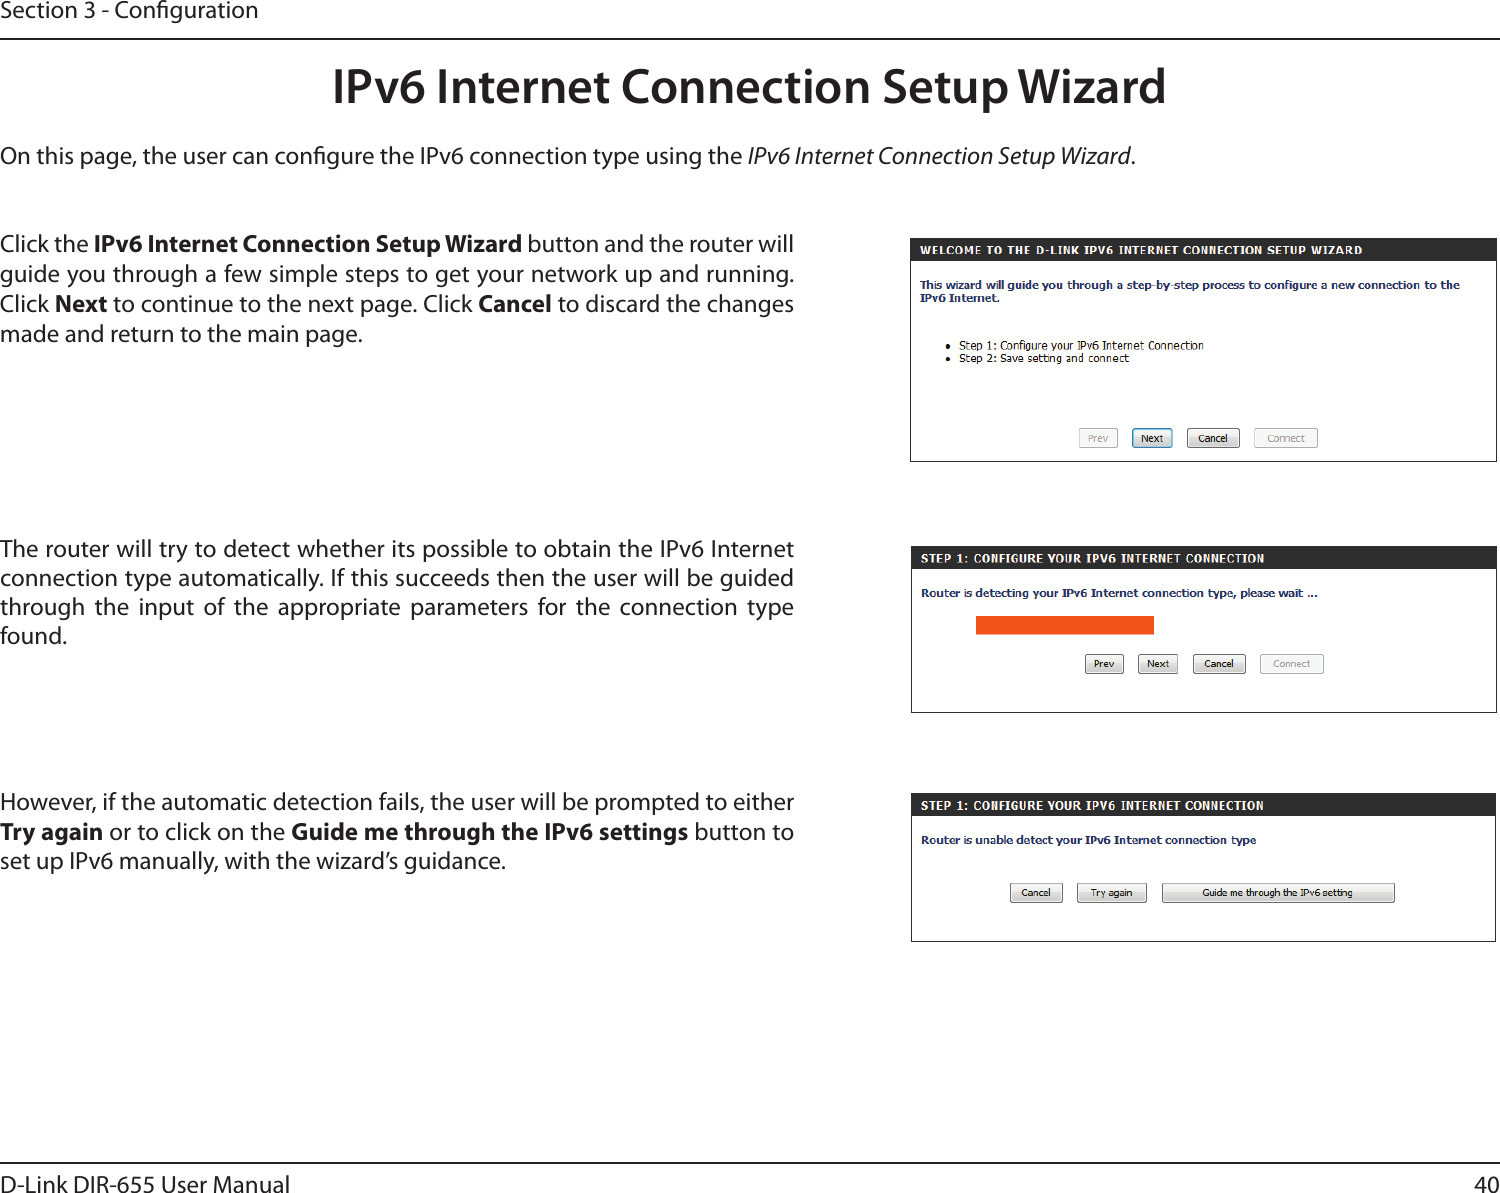 40D-Link DIR-655 User ManualSection 3 - CongurationIPv6 Internet Connection Setup WizardOn this page, the user can congure the IPv6 connection type using the IPv6 Internet Connection Setup Wizard.Click the IPv6 Internet Connection Setup Wizard button and the router will guide you through a few simple steps to get your network up and running. Click Next to continue to the next page. Click Cancel to discard the changes made and return to the main page.The router will try to detect whether its possible to obtain the IPv6 Internet connection type automatically. If this succeeds then the user will be guided through  the  input  of  the  appropriate  parameters  for  the  connection  type found.However, if the automatic detection fails, the user will be prompted to either Try again or to click on the Guide me through the IPv6 settings button to set up IPv6 manually, with the wizard’s guidance.